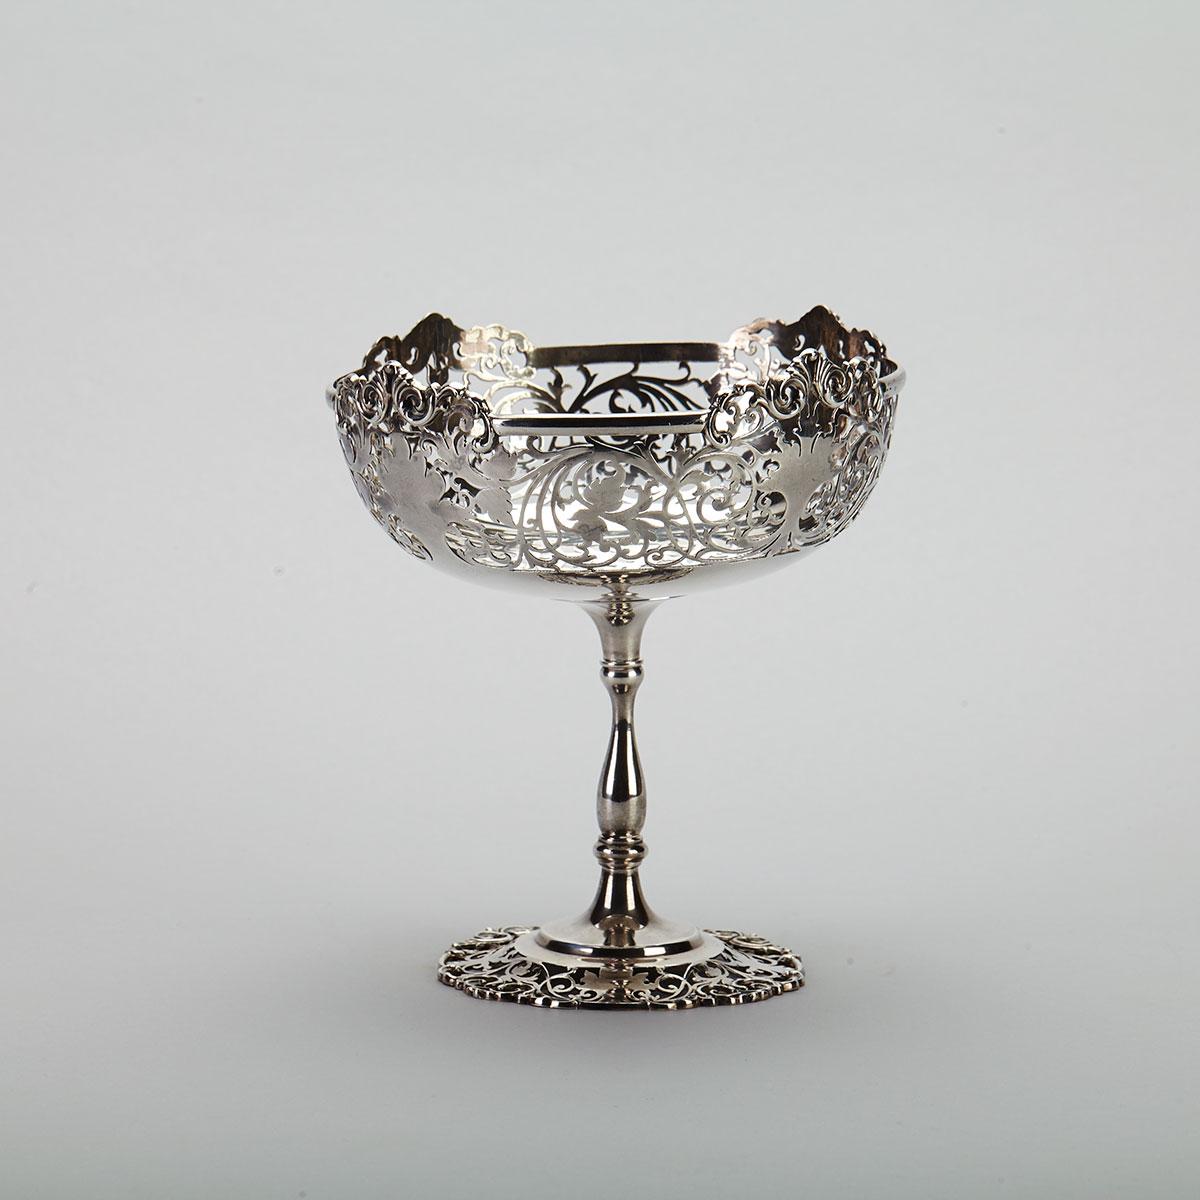 English Silver Footed Comport, Mappin & Webb, Sheffield, 1919